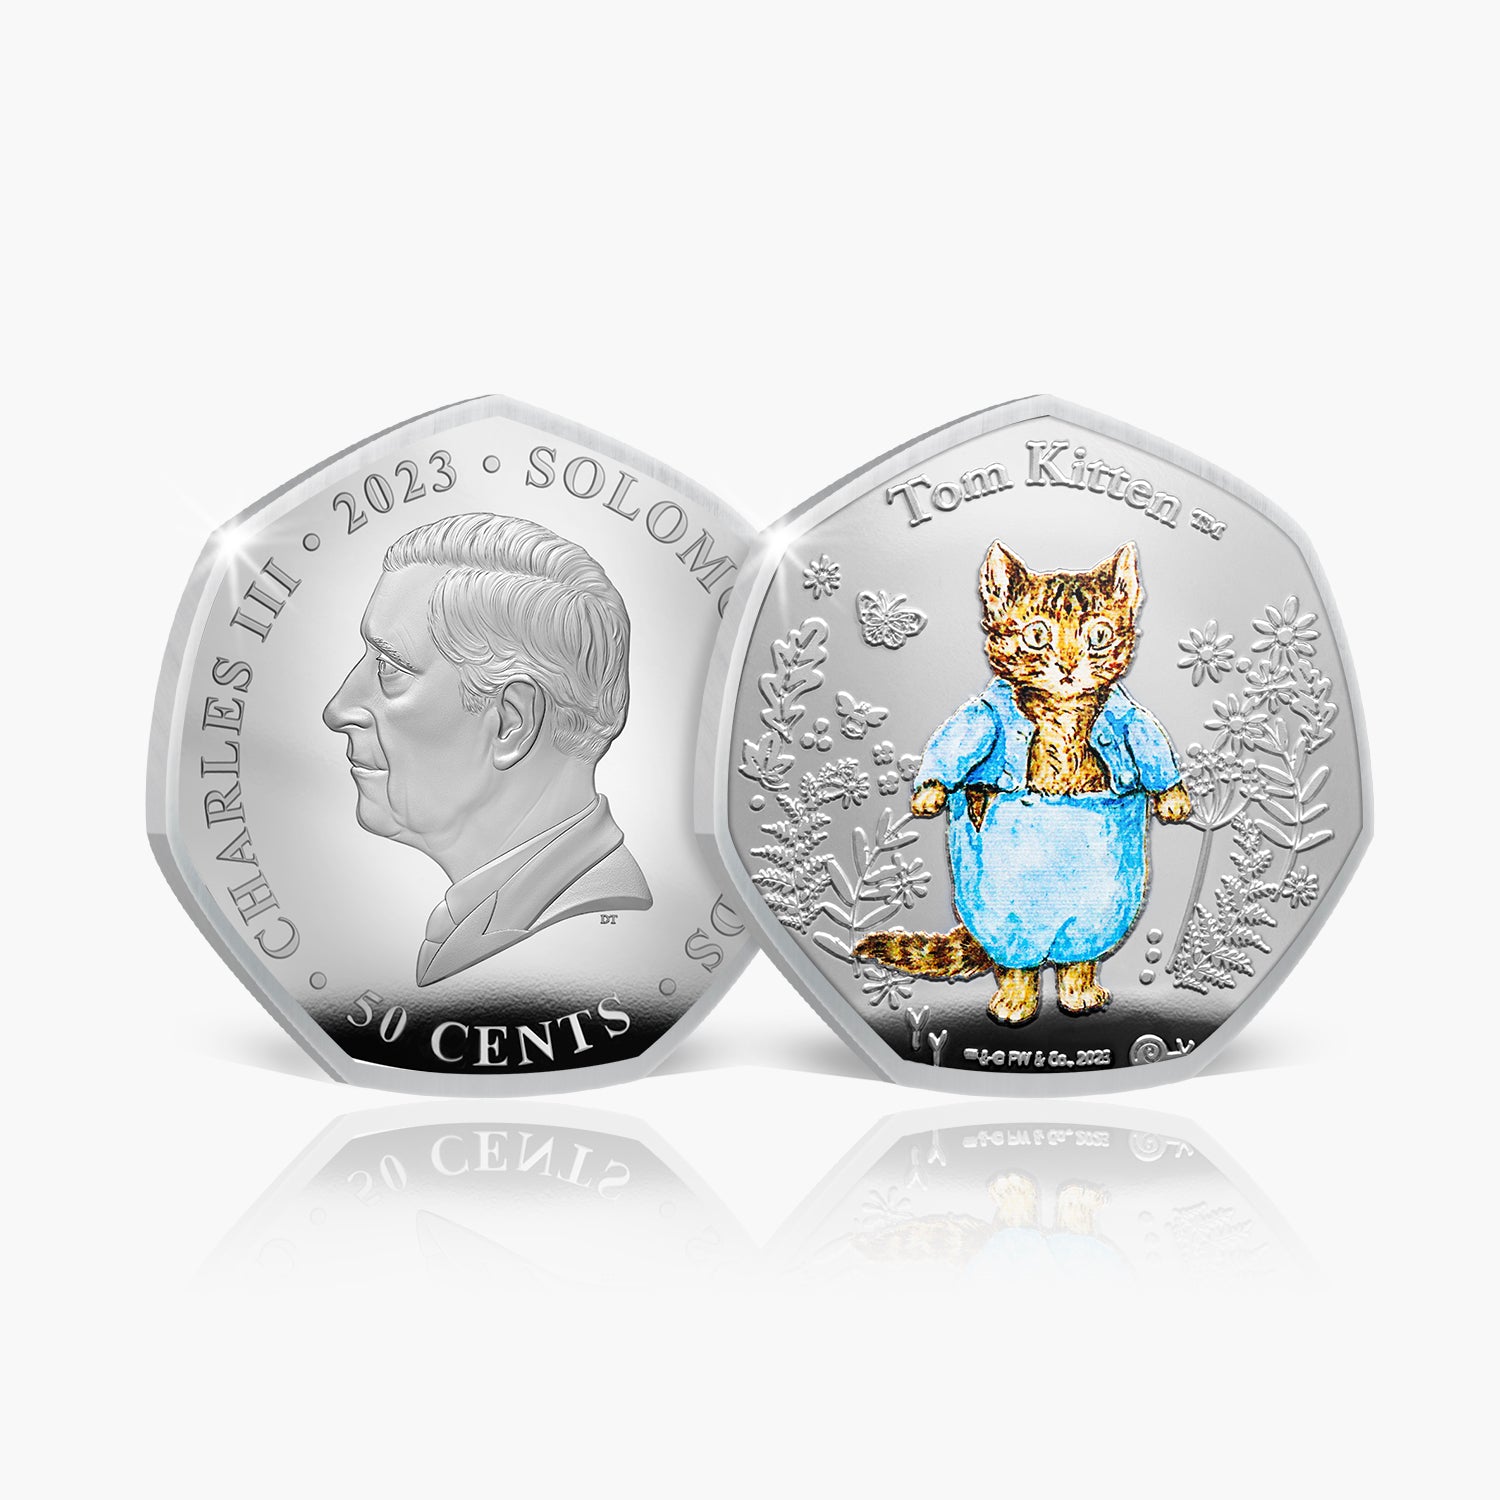 The World of Peter Rabbit 2023 Coin Collection - Tom Kitten Coin